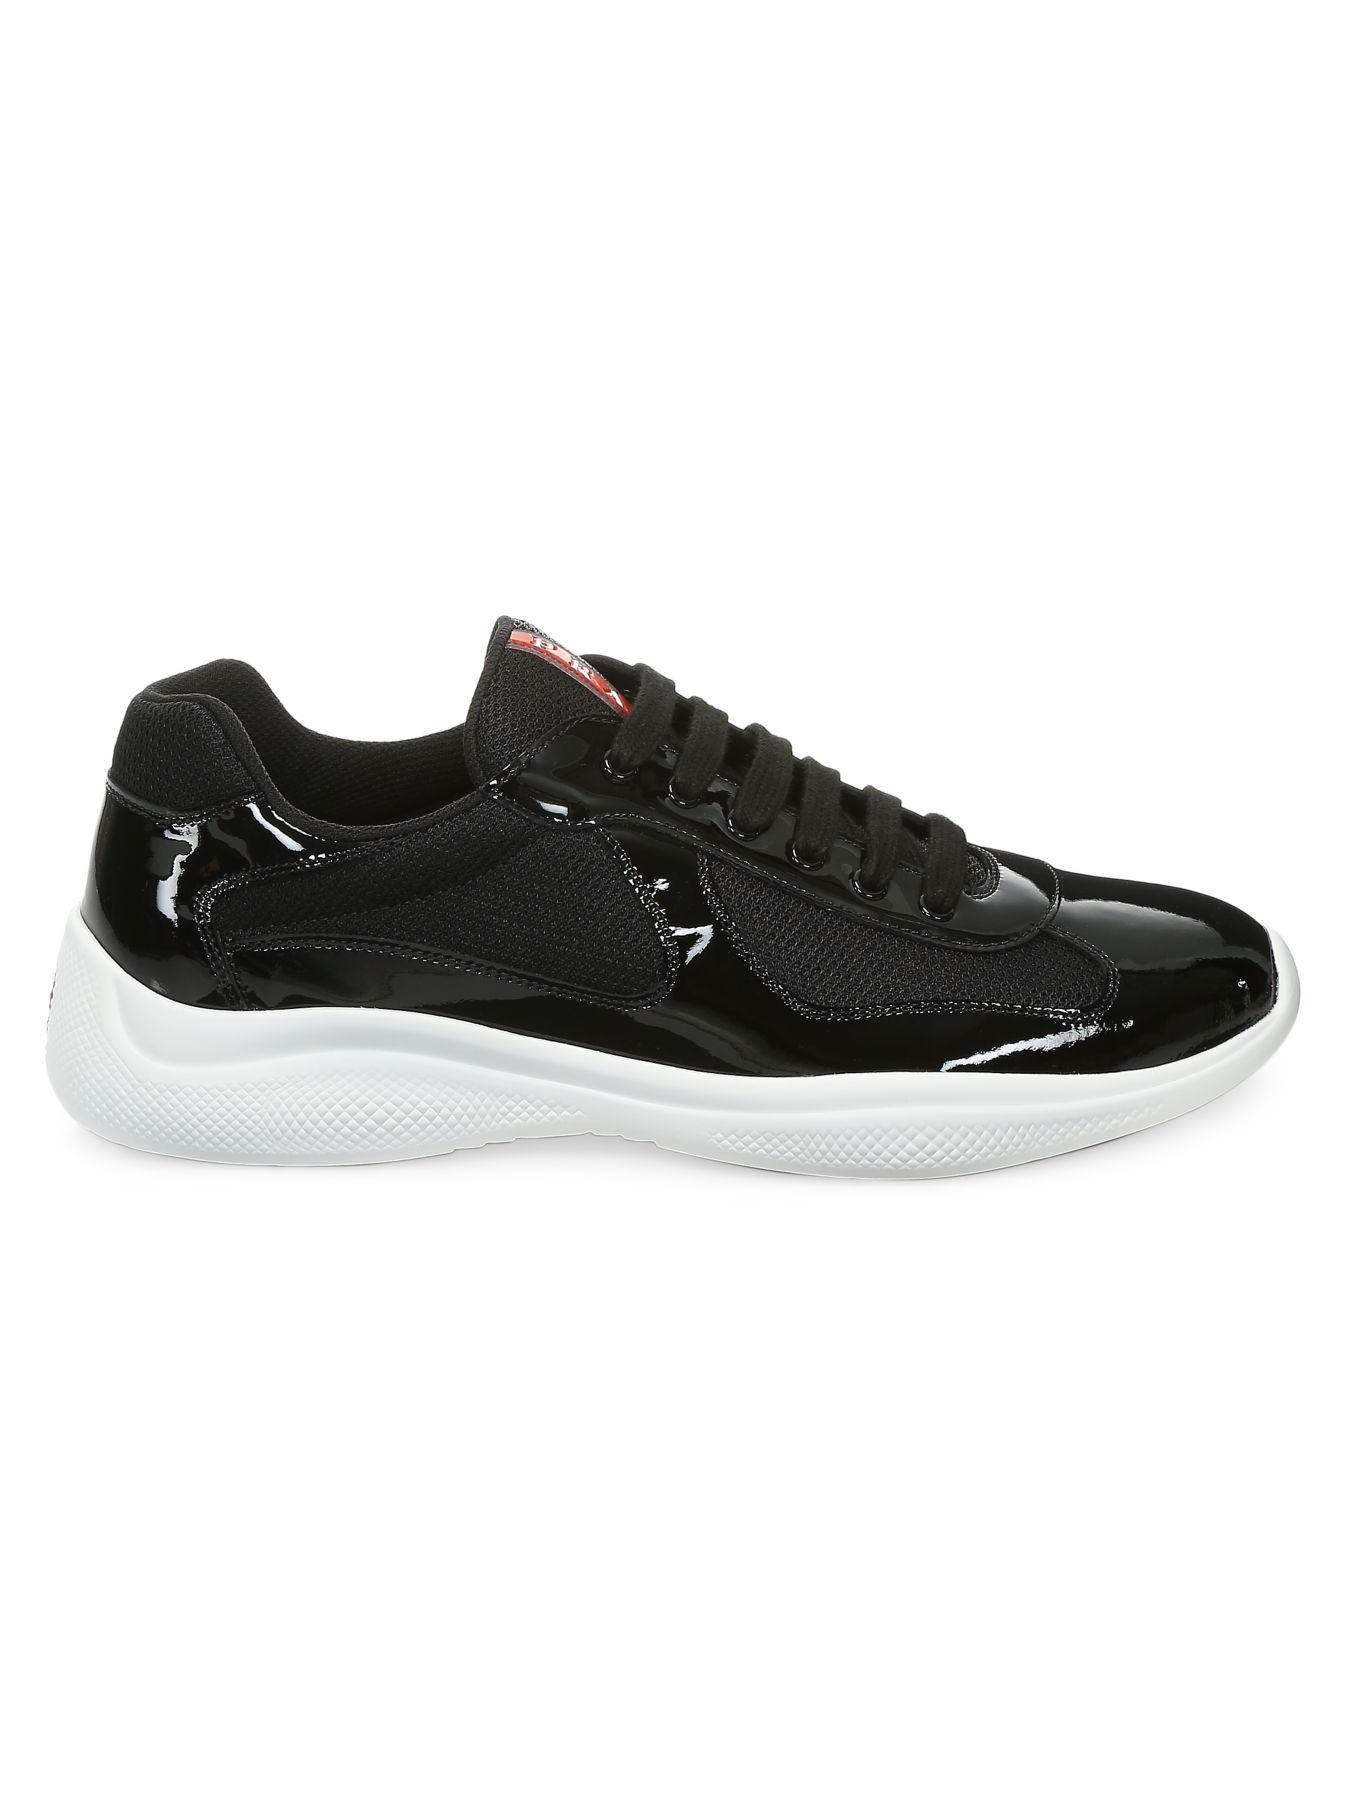 Prada America's Cup Patent Leather & Technical Fabric Sneakers in Black